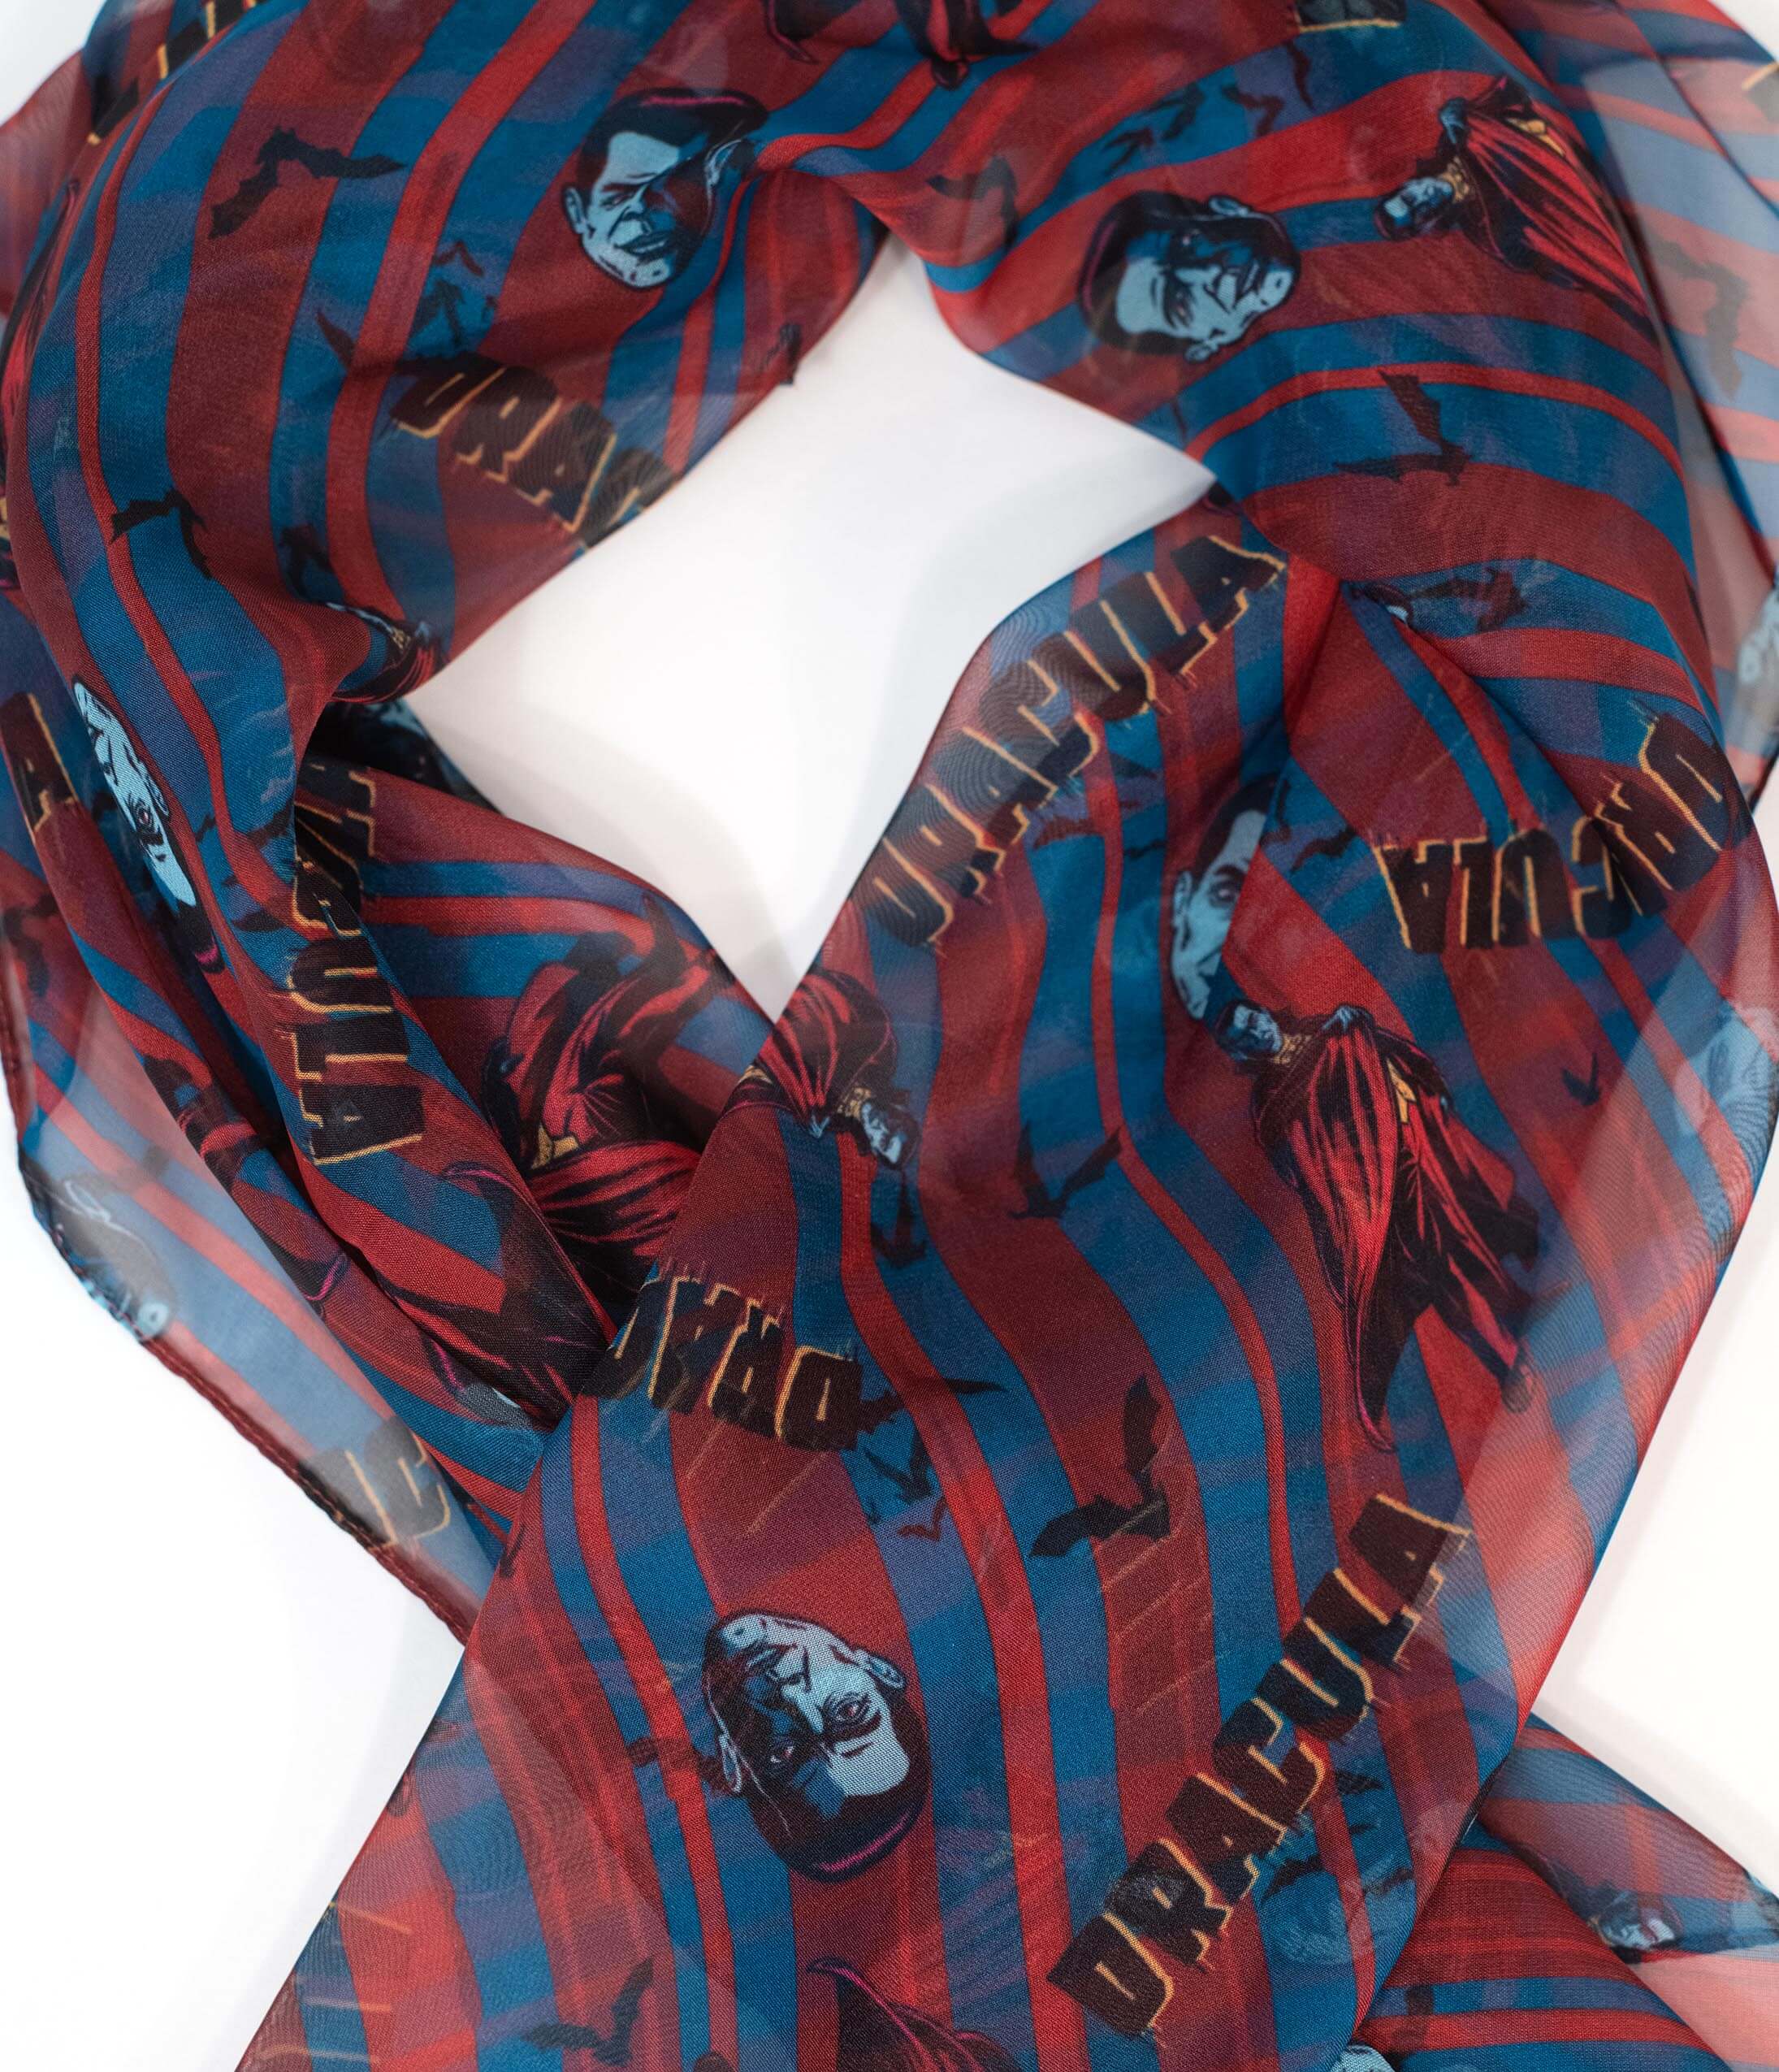 This is a Universal Monsters Dracula chiffon hair scarf by Unique Vintage and it is red and blue with his head and cape.